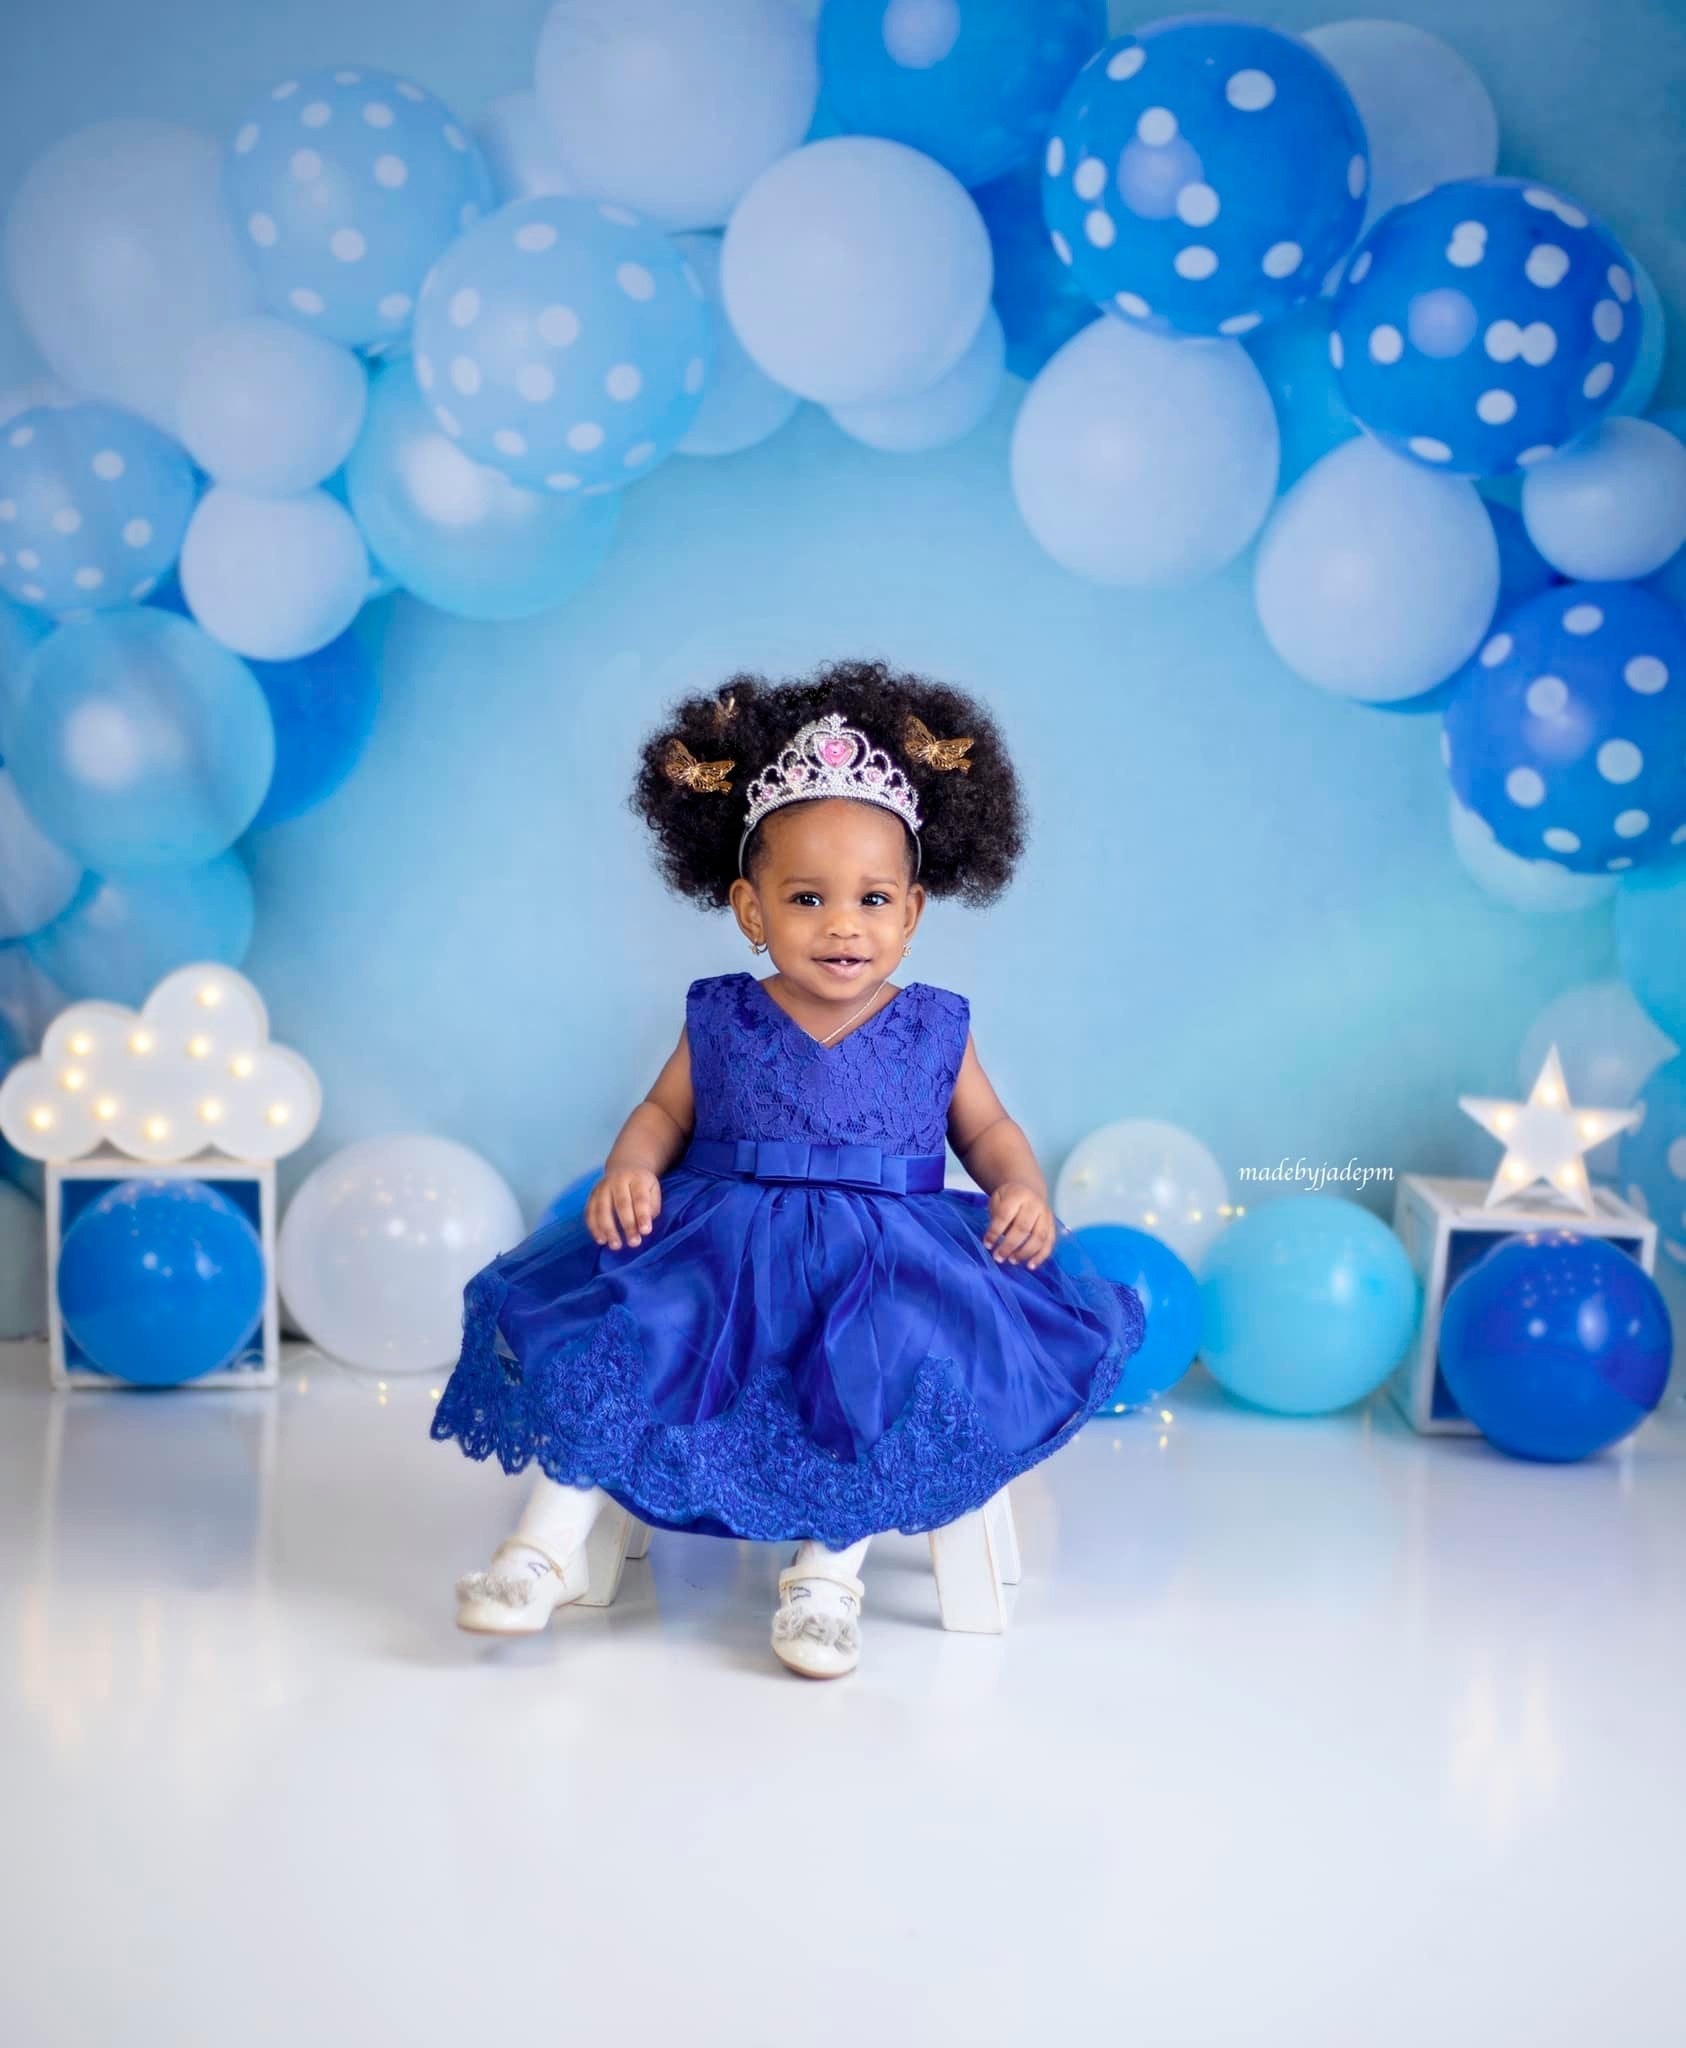 Kate Blue and White Balloons Birthday Children Backdrop for Photography Designed by Kerry Anderson (only ship to Canada)